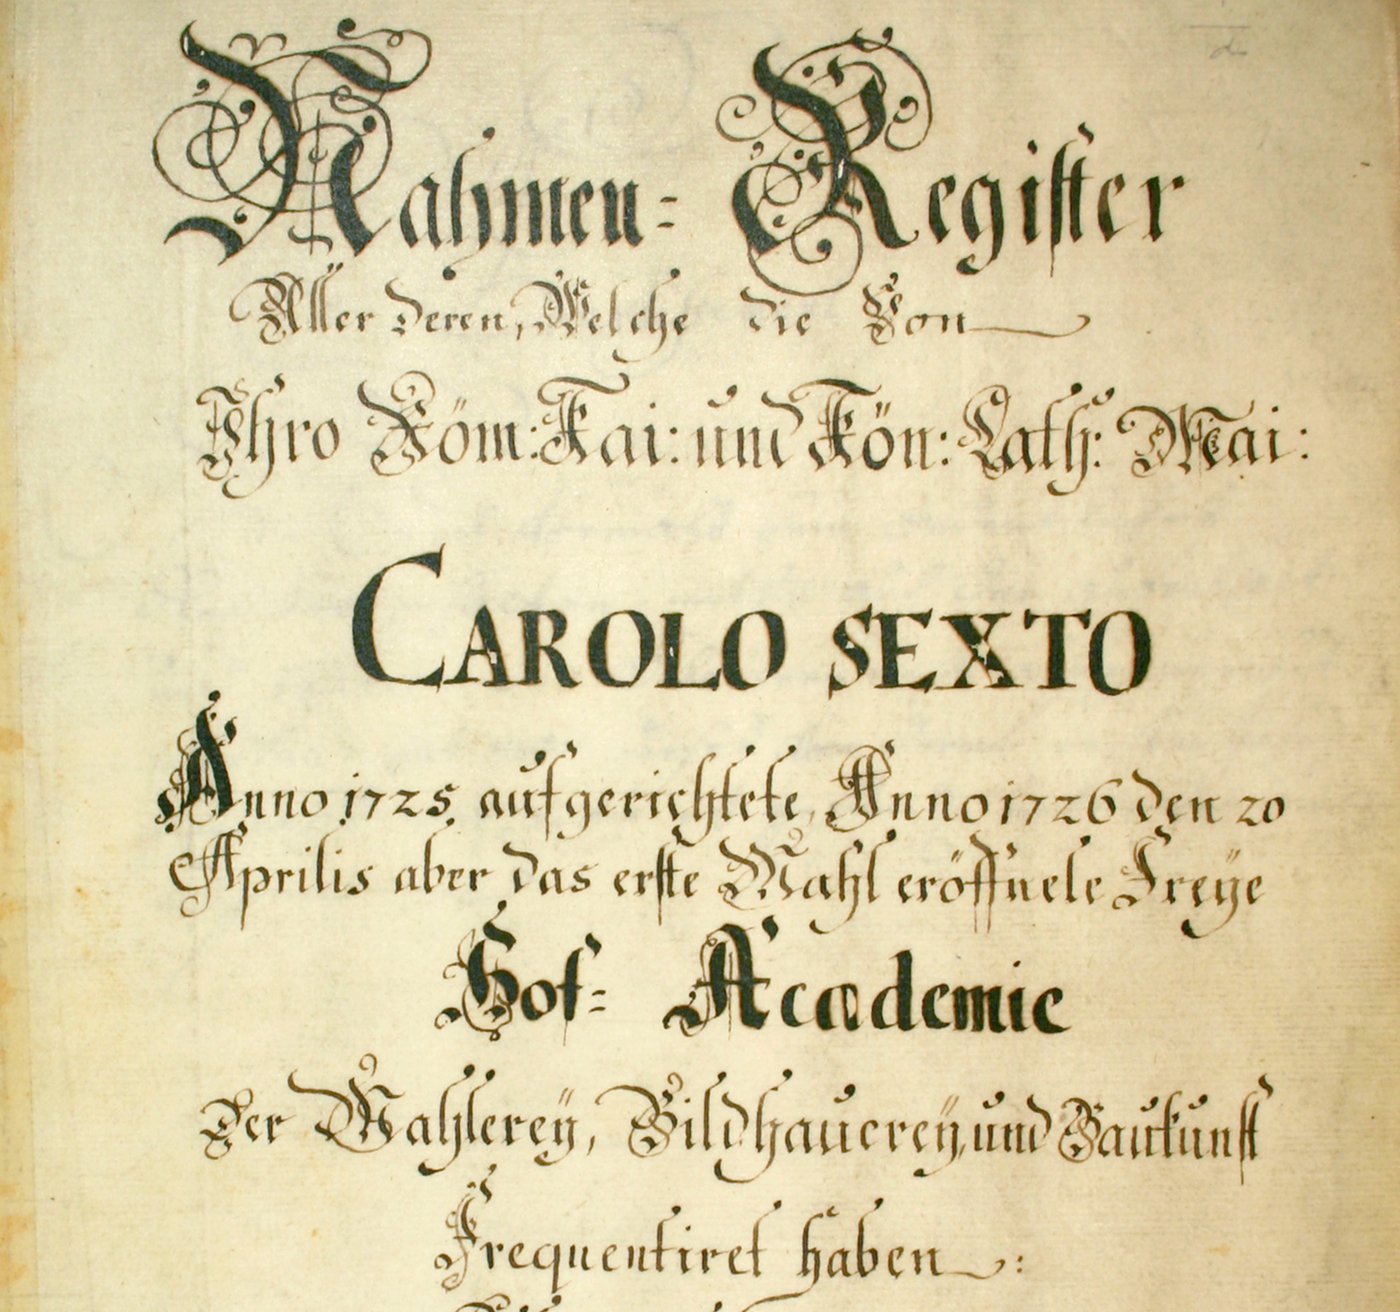 Detail of the first page of the matriculation book, black ink on yellowish paper in ornate script.